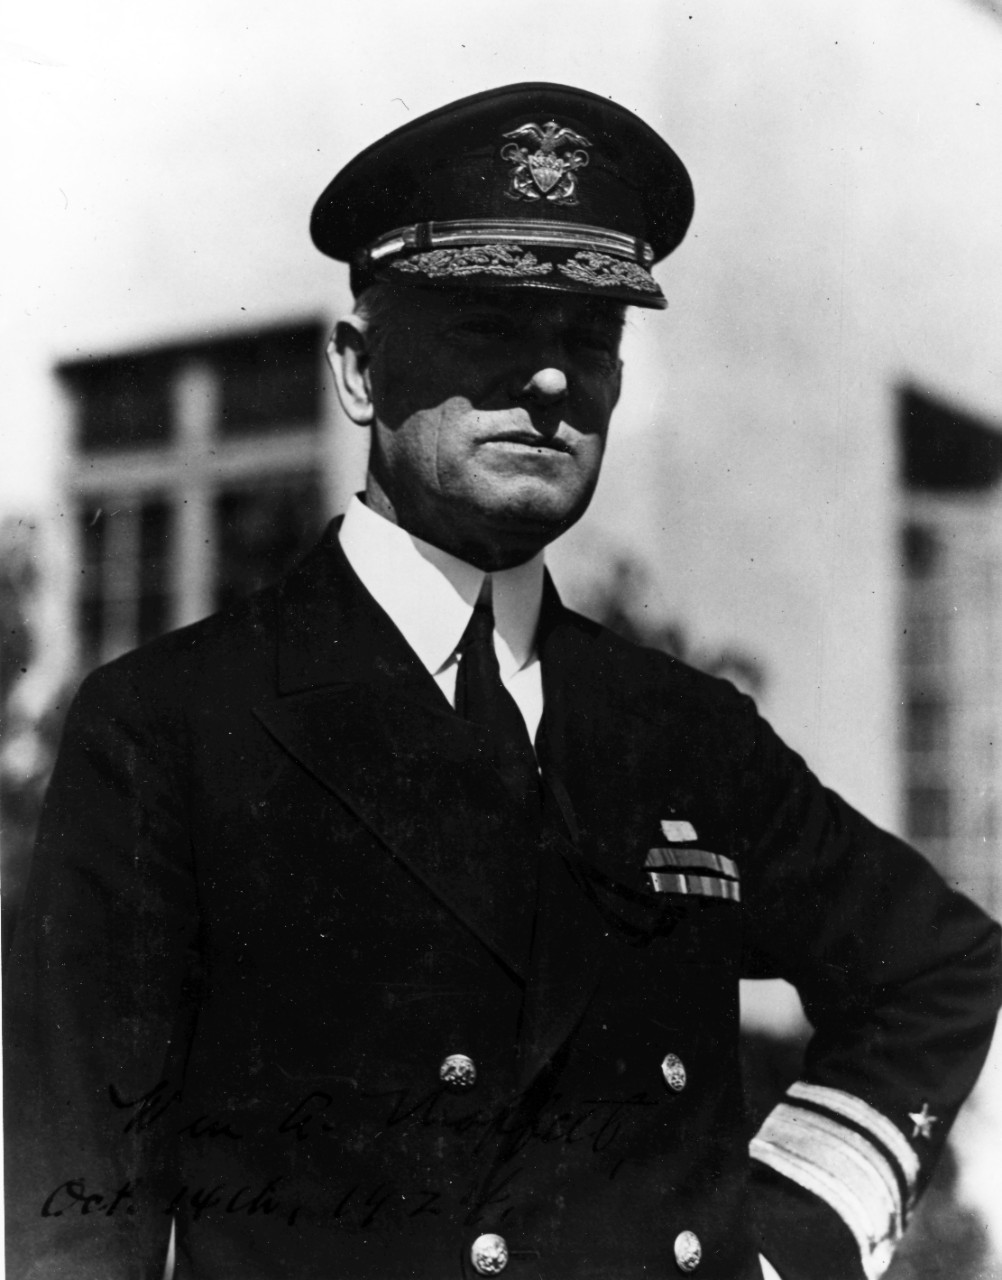 RADM William A. Moffett, October 14, 1924. Image is from the collection of VADM T.T. Craven. 